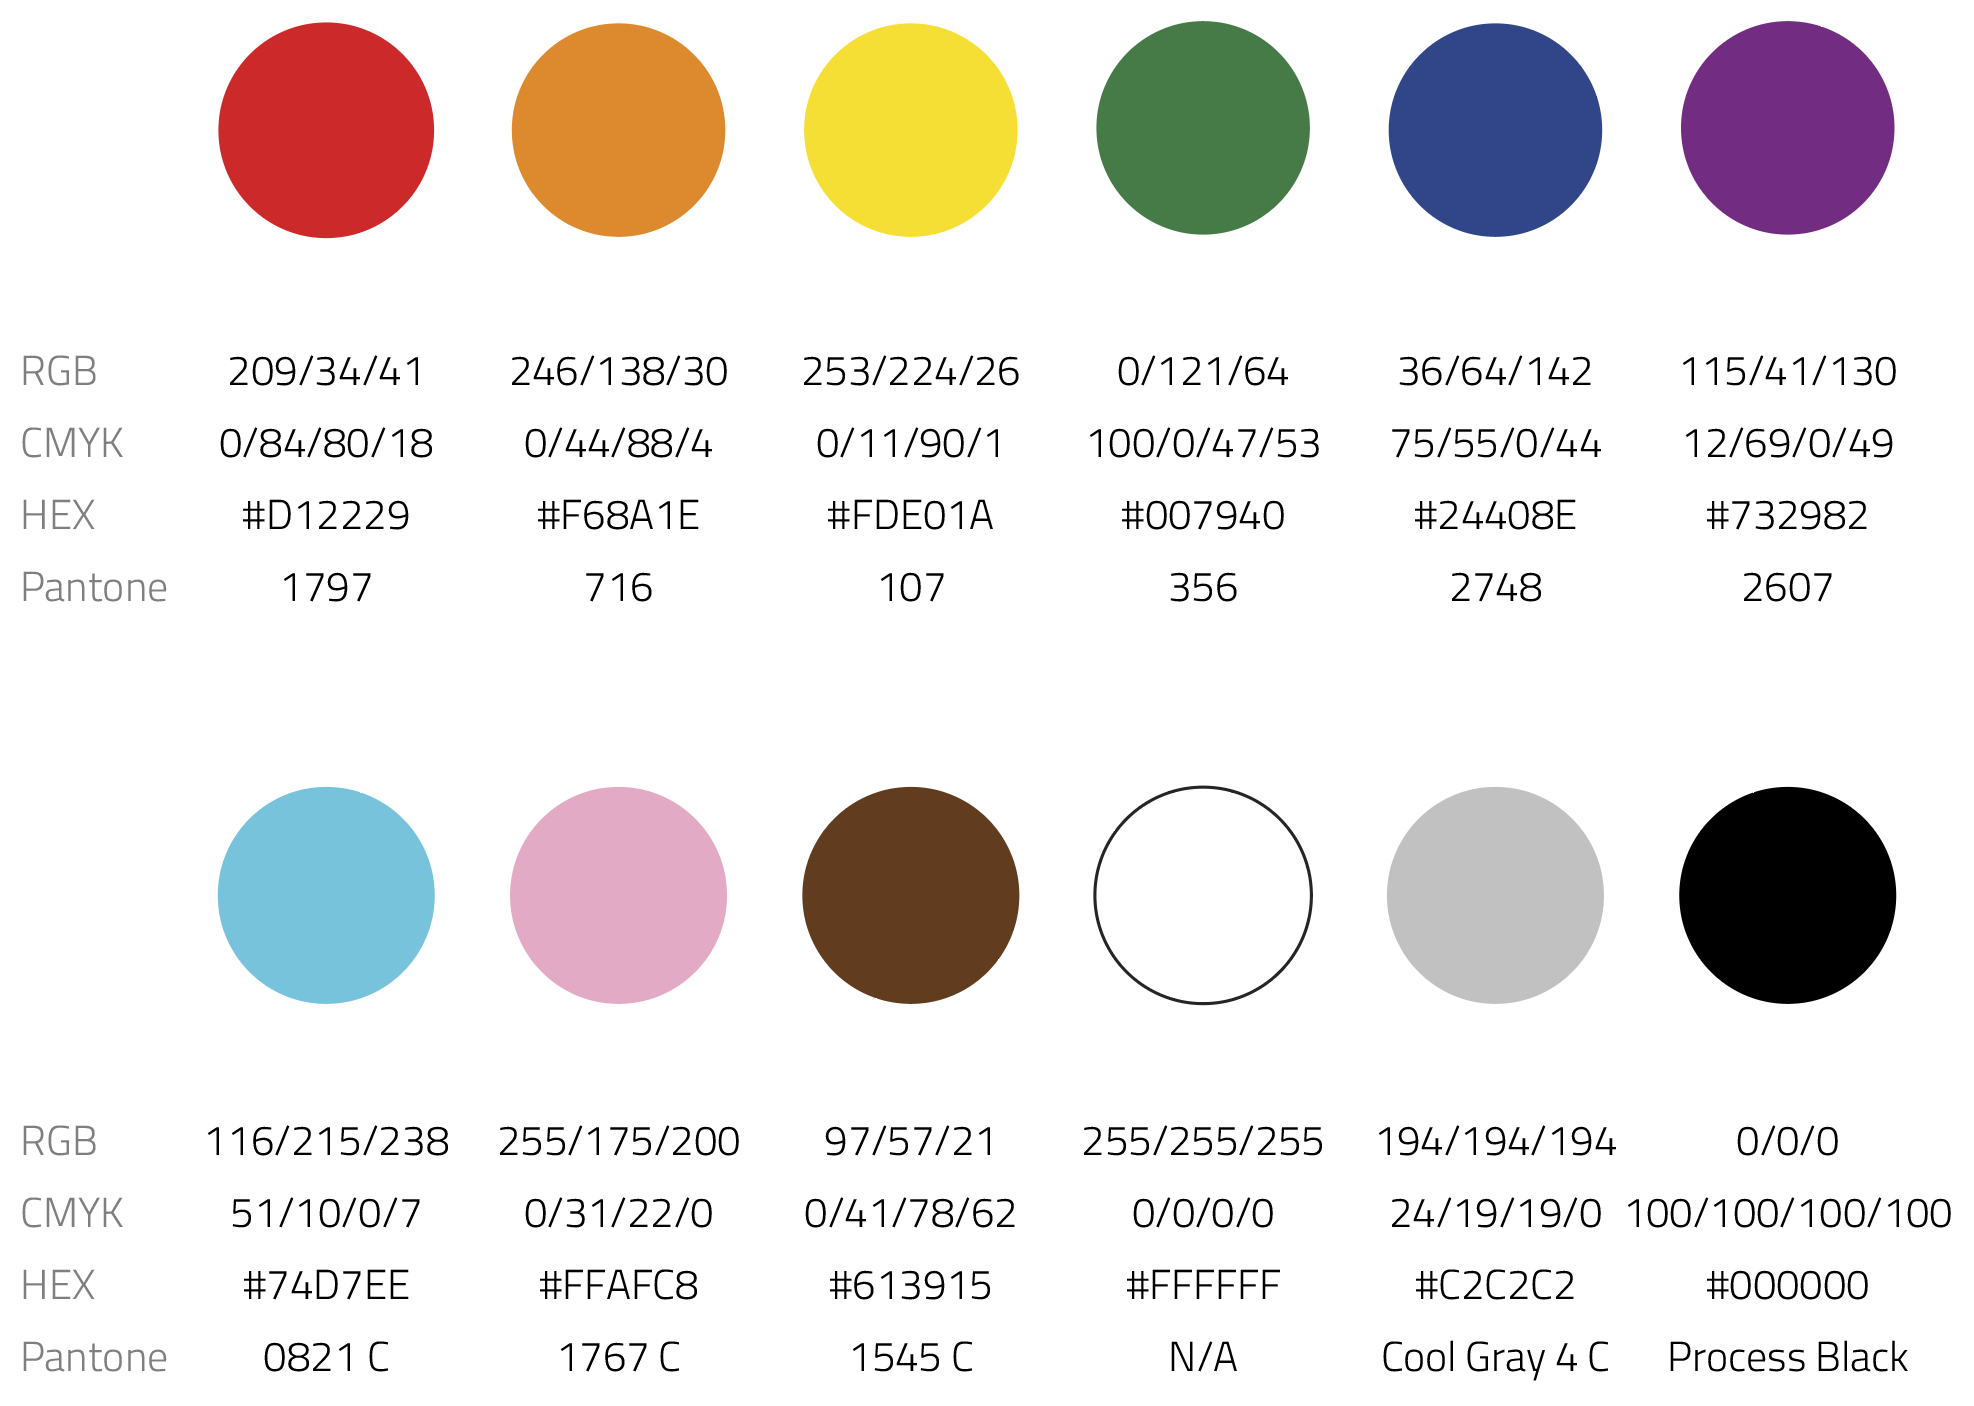 Circles containing the various colors used throughout the APLA brand